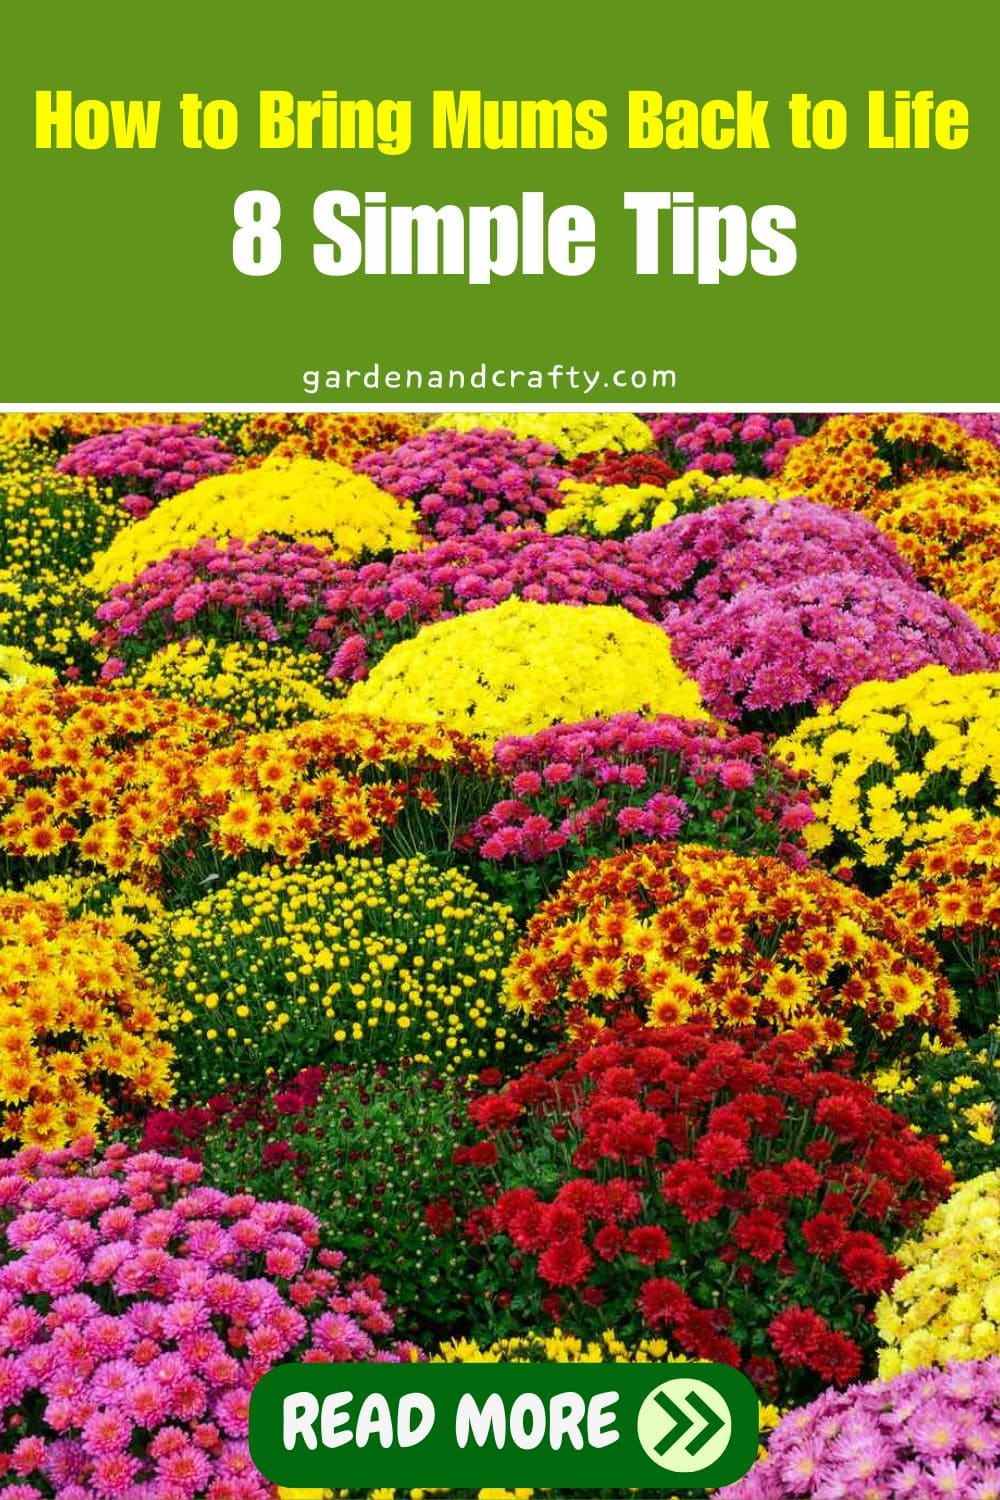 How to Bring Mums Back to Life: 8 Simple Tips